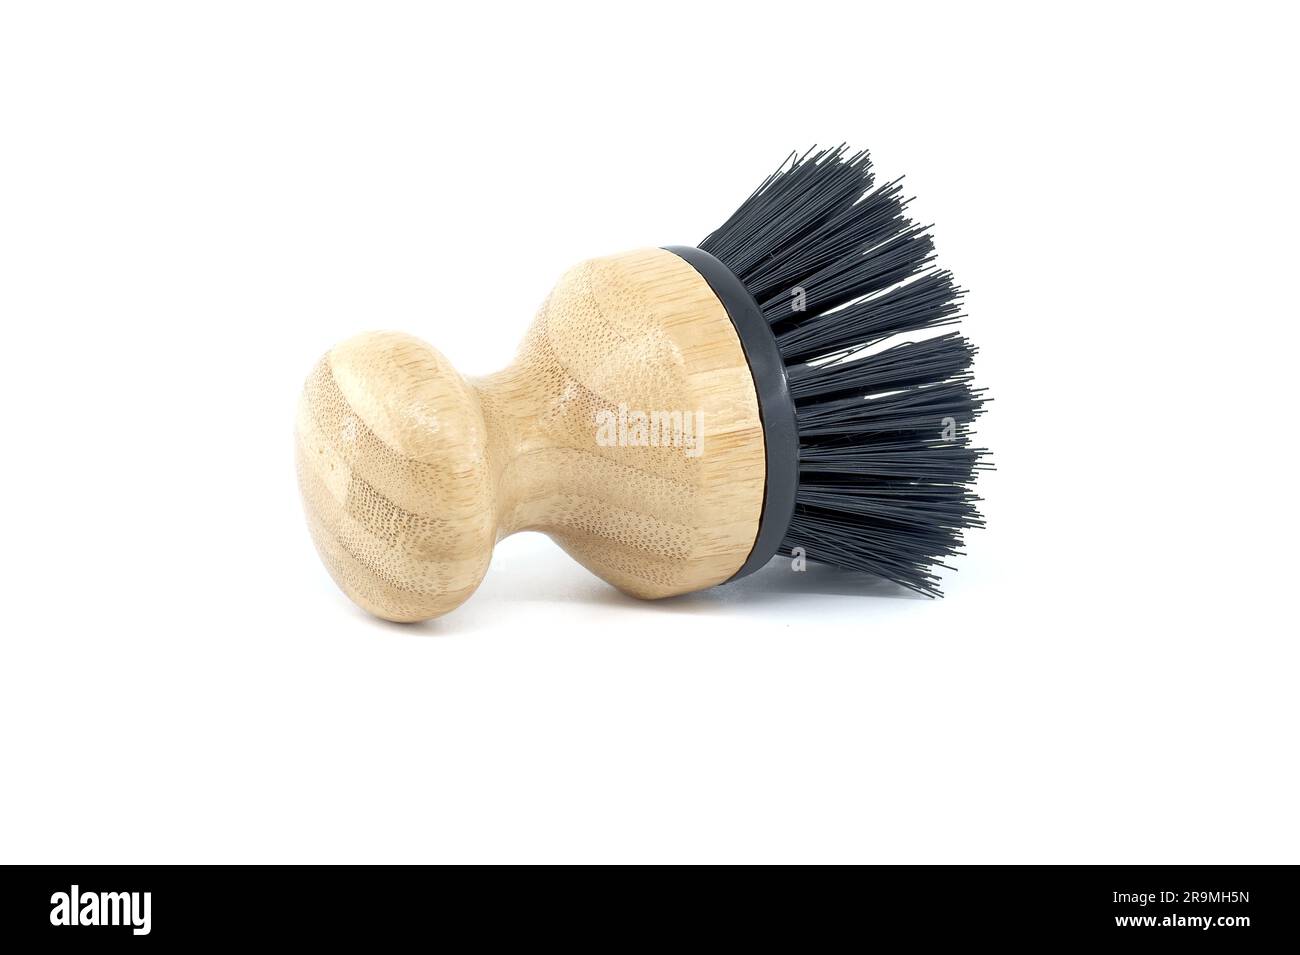 https://c8.alamy.com/comp/2R9MH5N/highly-detailed-perspective-image-of-dish-brush-with-black-bristles-intended-for-scrubbing-dishes-or-other-objects-with-hard-to-clean-surfaces-2R9MH5N.jpg